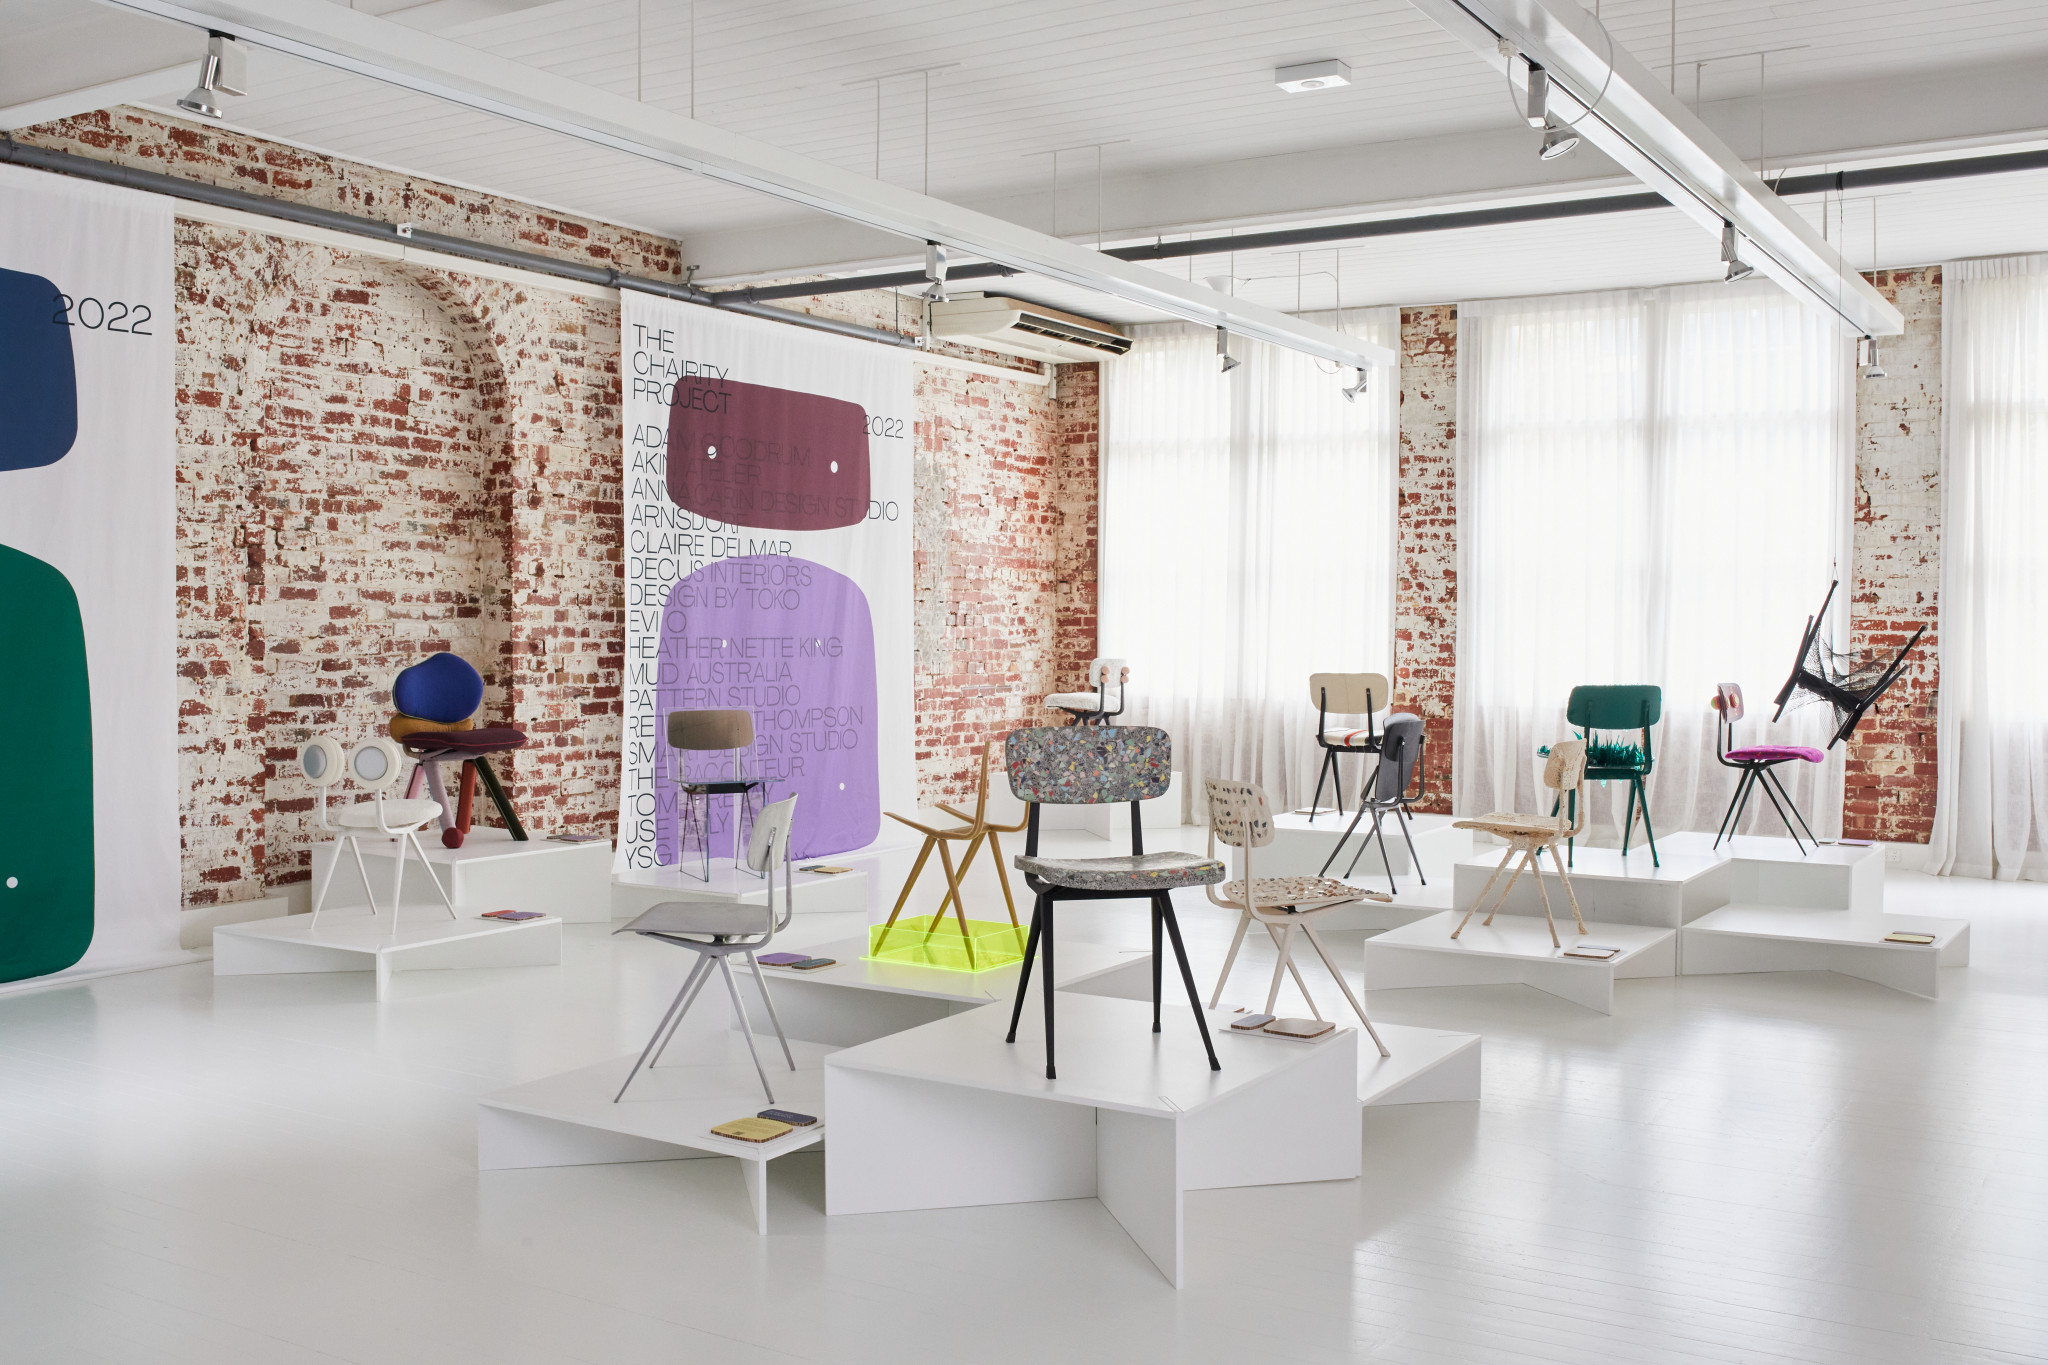 Chairity By Cult Design During Melbourne Design Week 2022 Photo Cathy Marshall 2048x1365 